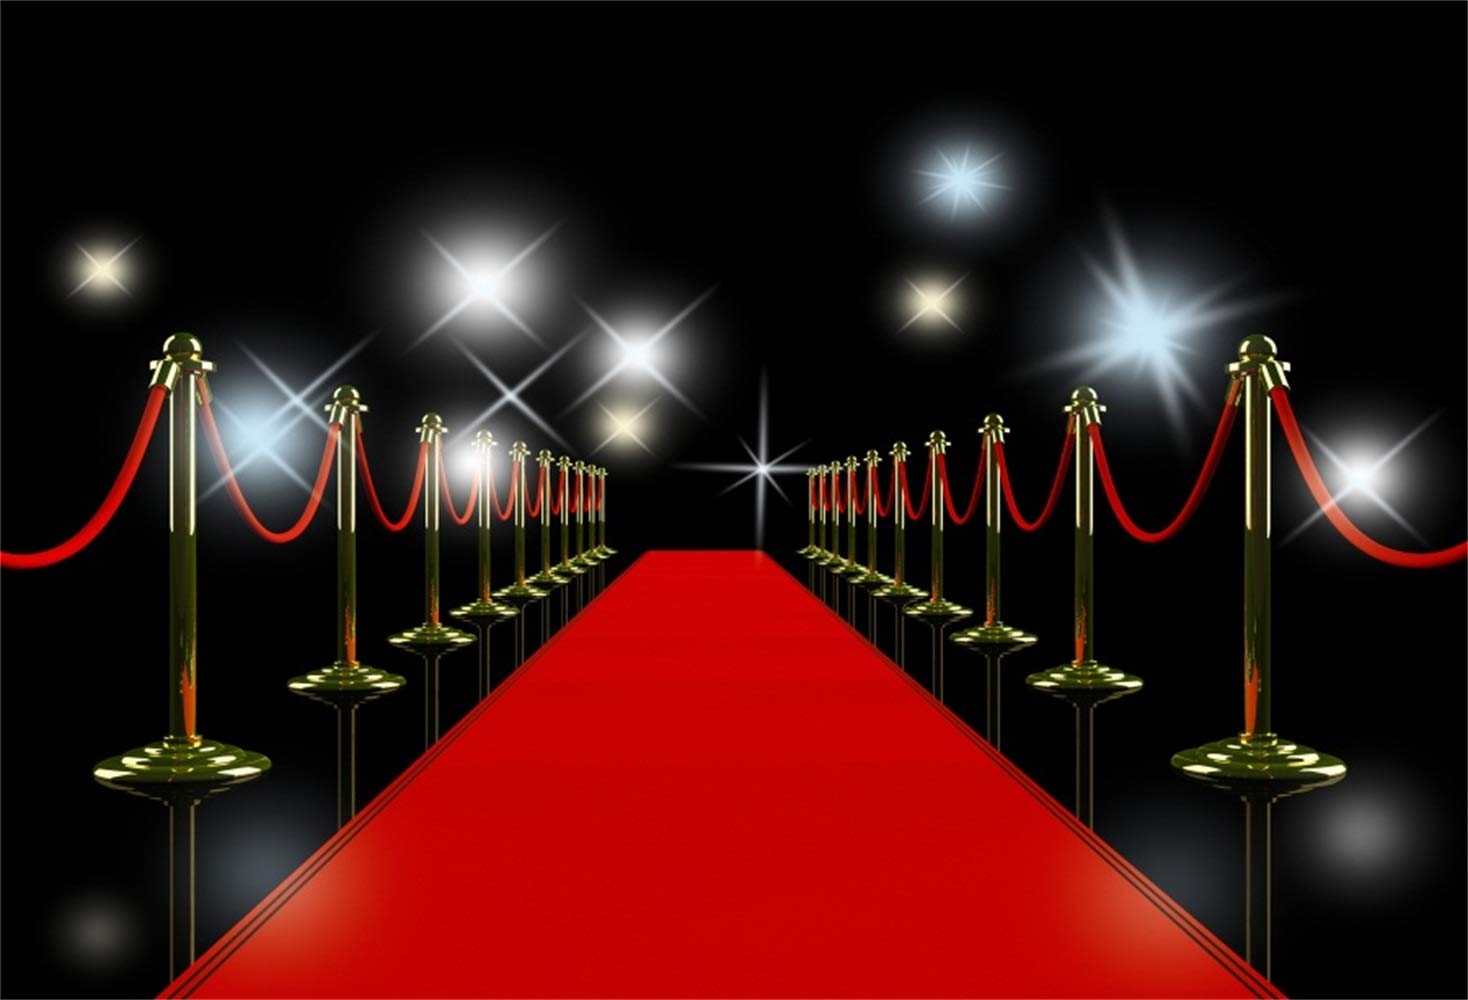 A red carpet with bright lights.